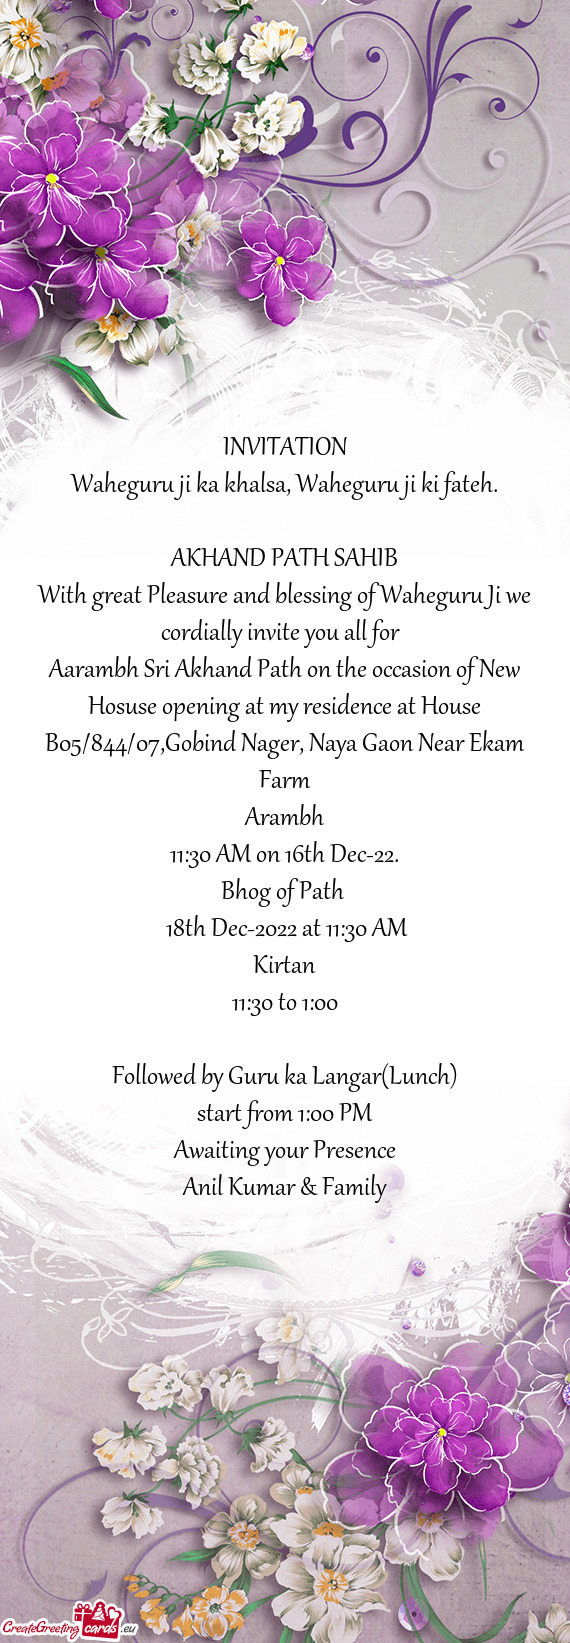 With great Pleasure and blessing of Waheguru Ji we cordially invite you all for